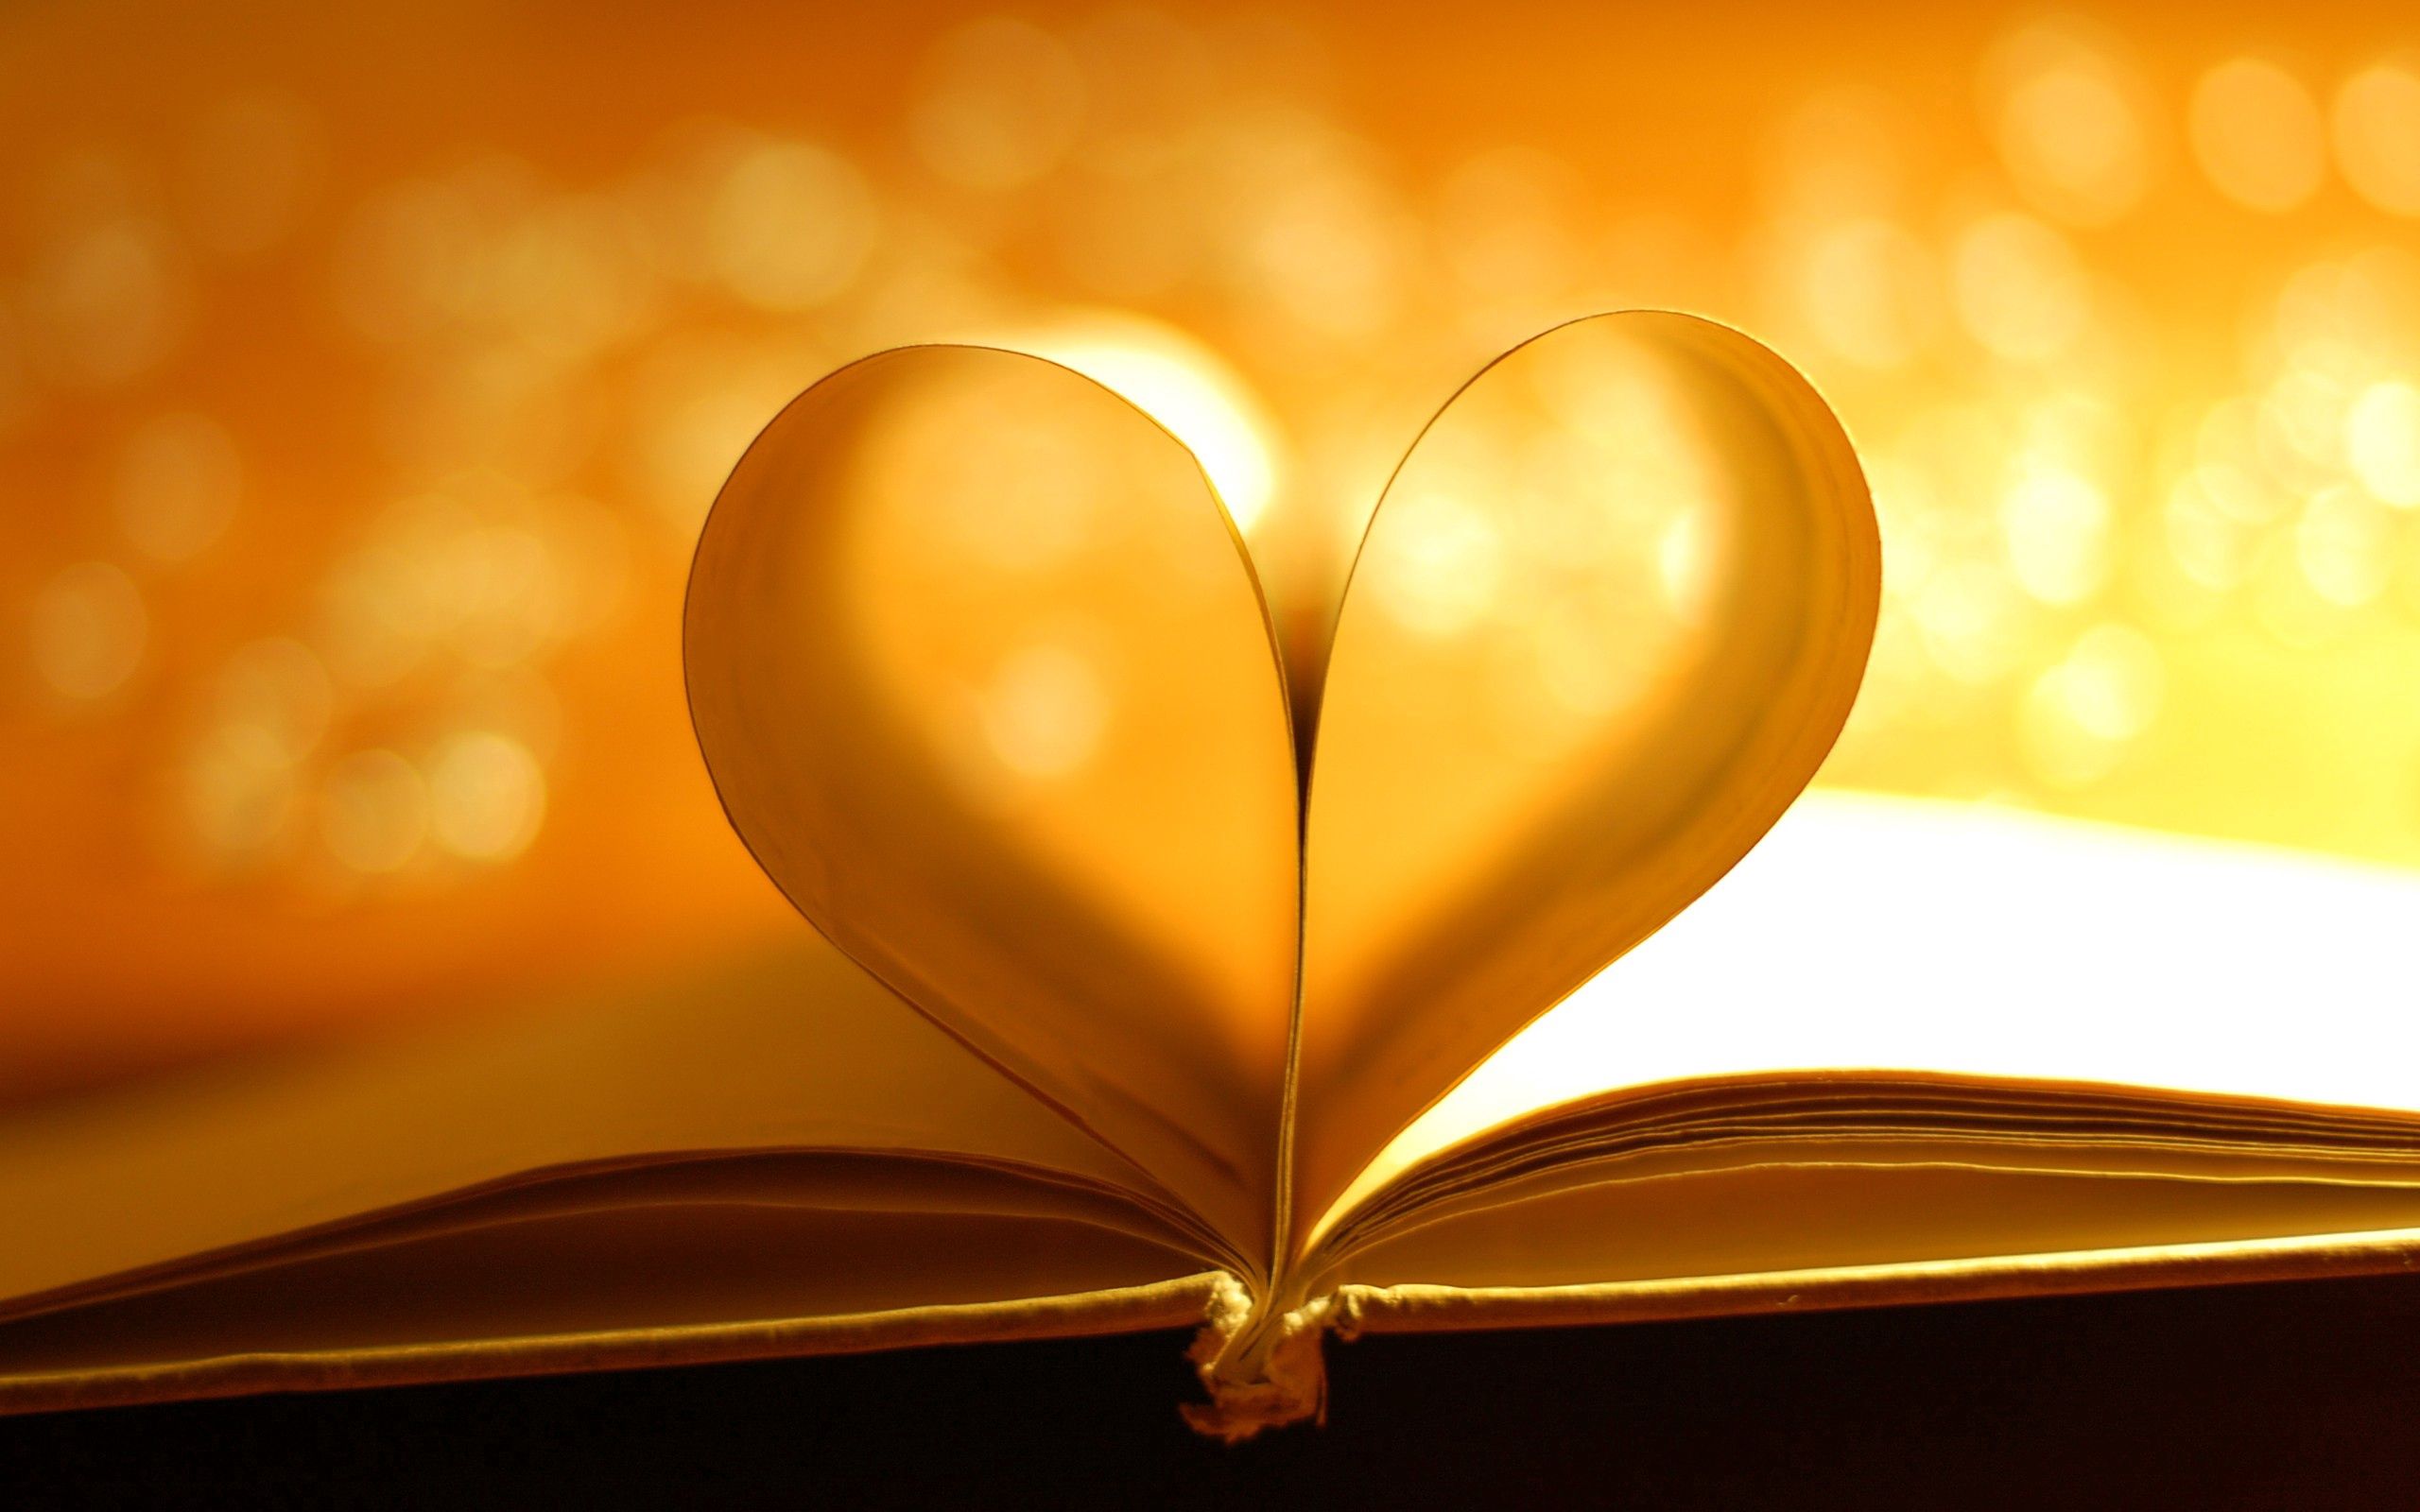 love, shine, light, shadow, heart, book, pages, page